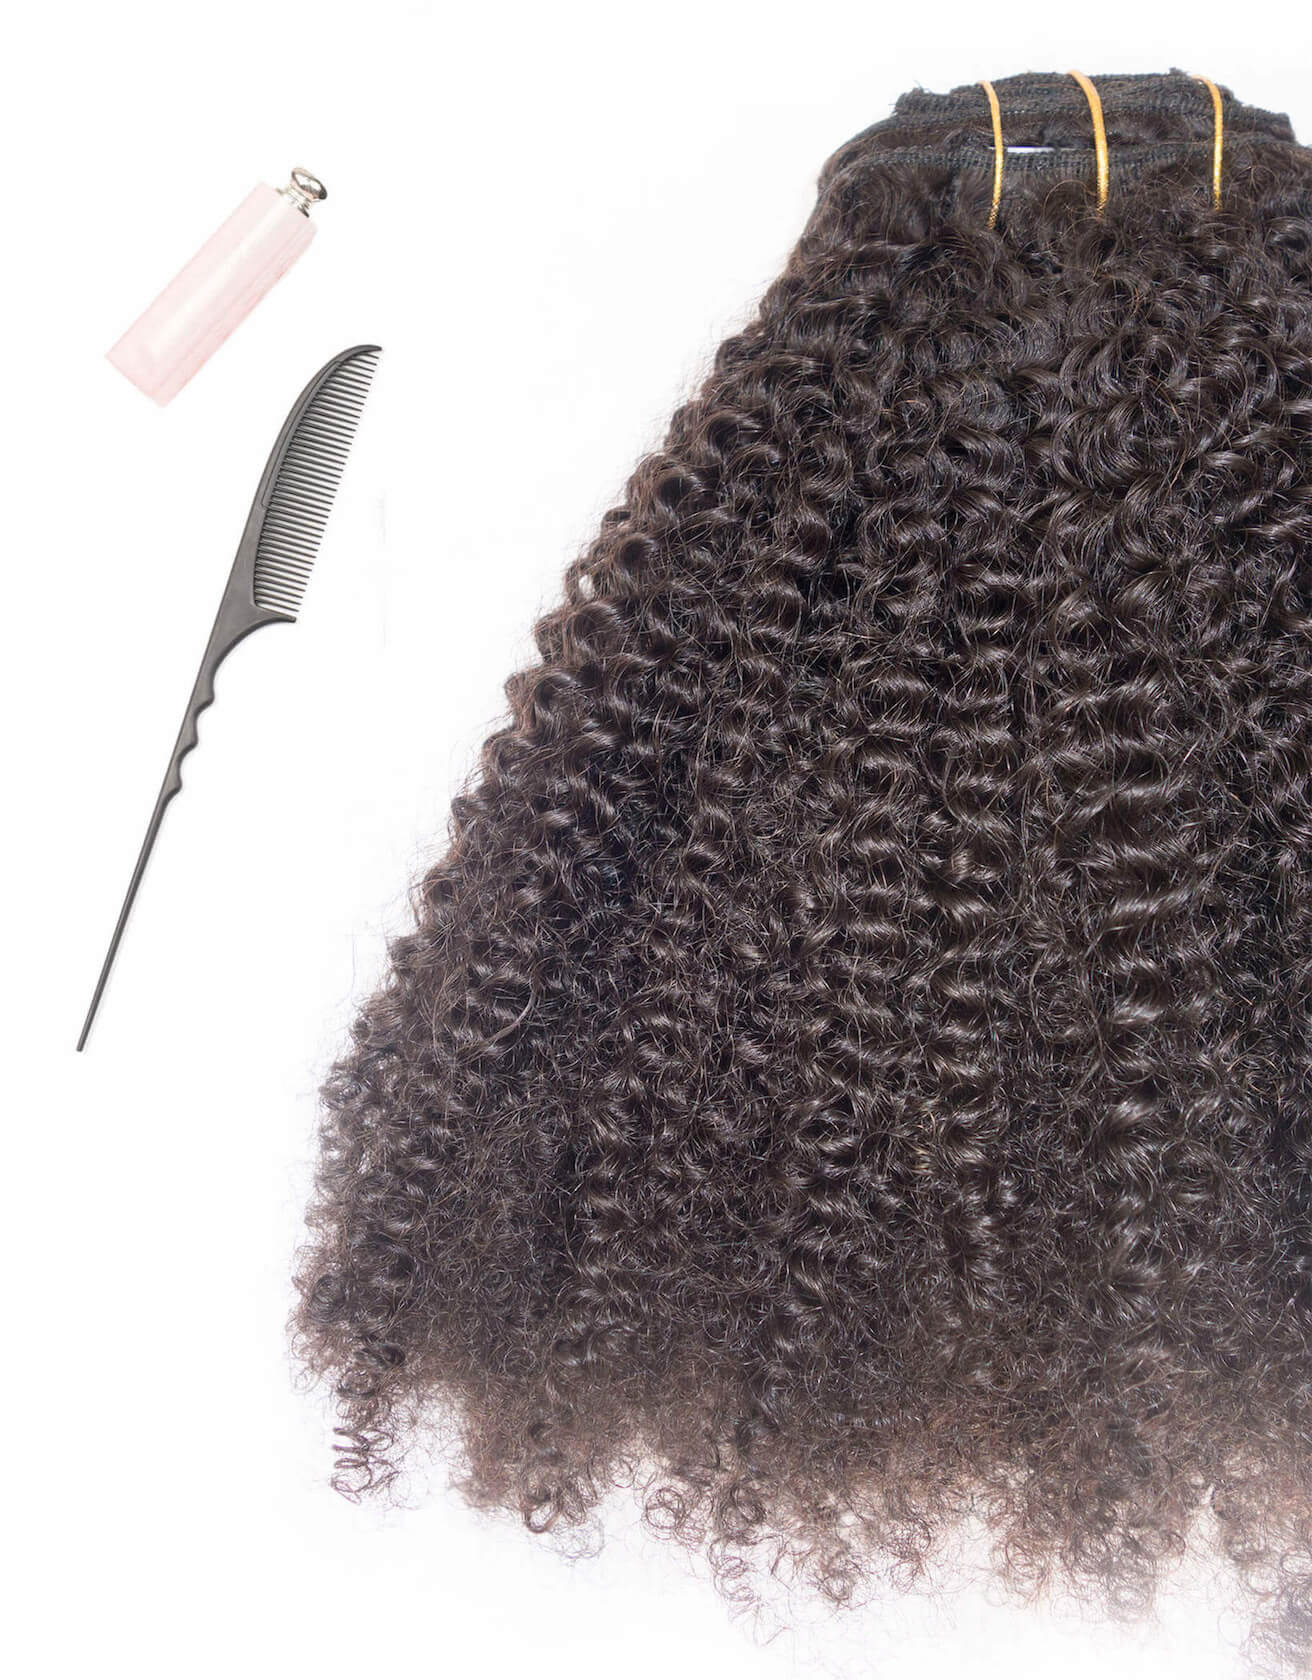 Kinky Curly Hair Extensions Clips In Virgin Human Hair For Sale